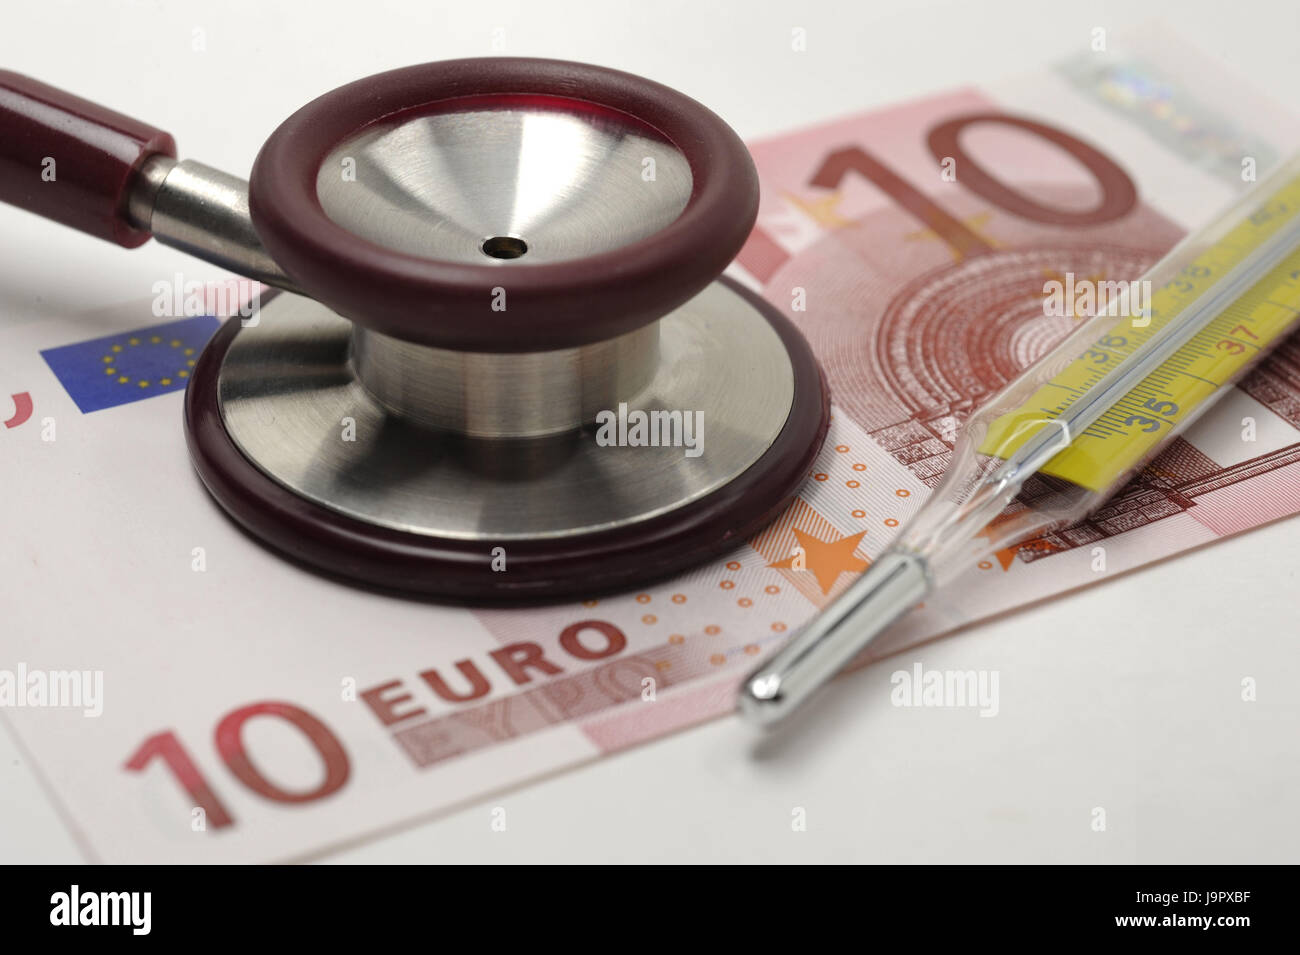 Stethoscope,money,eurolight,clinical thermometer,detail,icon,expenses,public health, Stock Photo